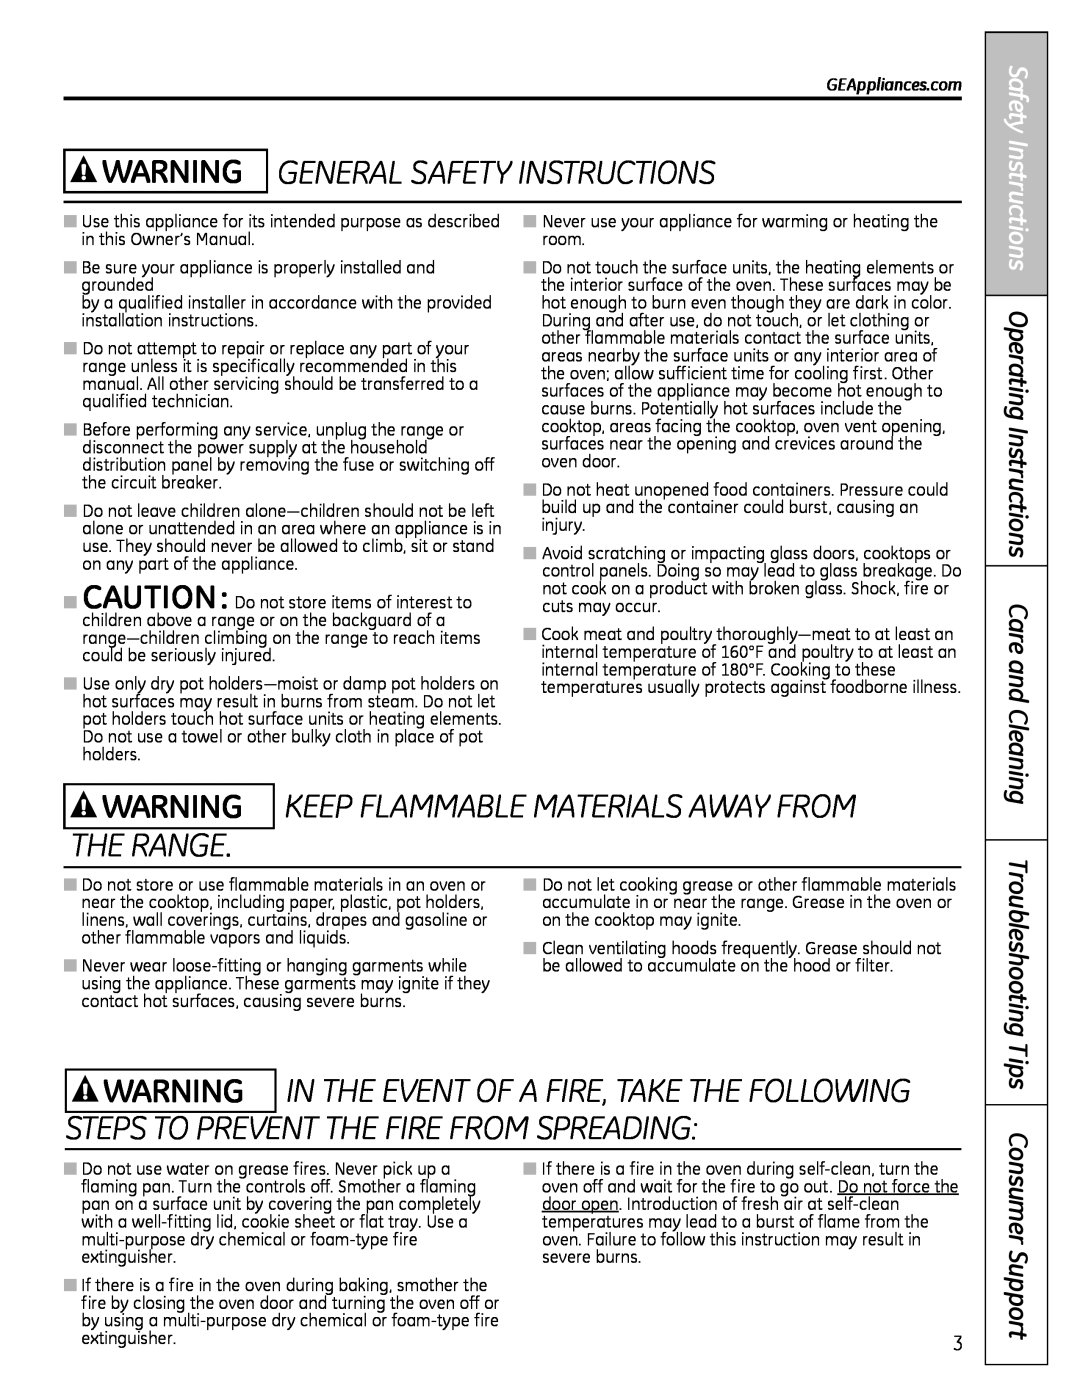 Hotpoint JBP61 WARNING GENERAl SAFETY INSTRuCTIONS, WARNING kEEP FlAMMABlE MATERIAlS AWAY FROM ThE RANGE, Consumer Support 